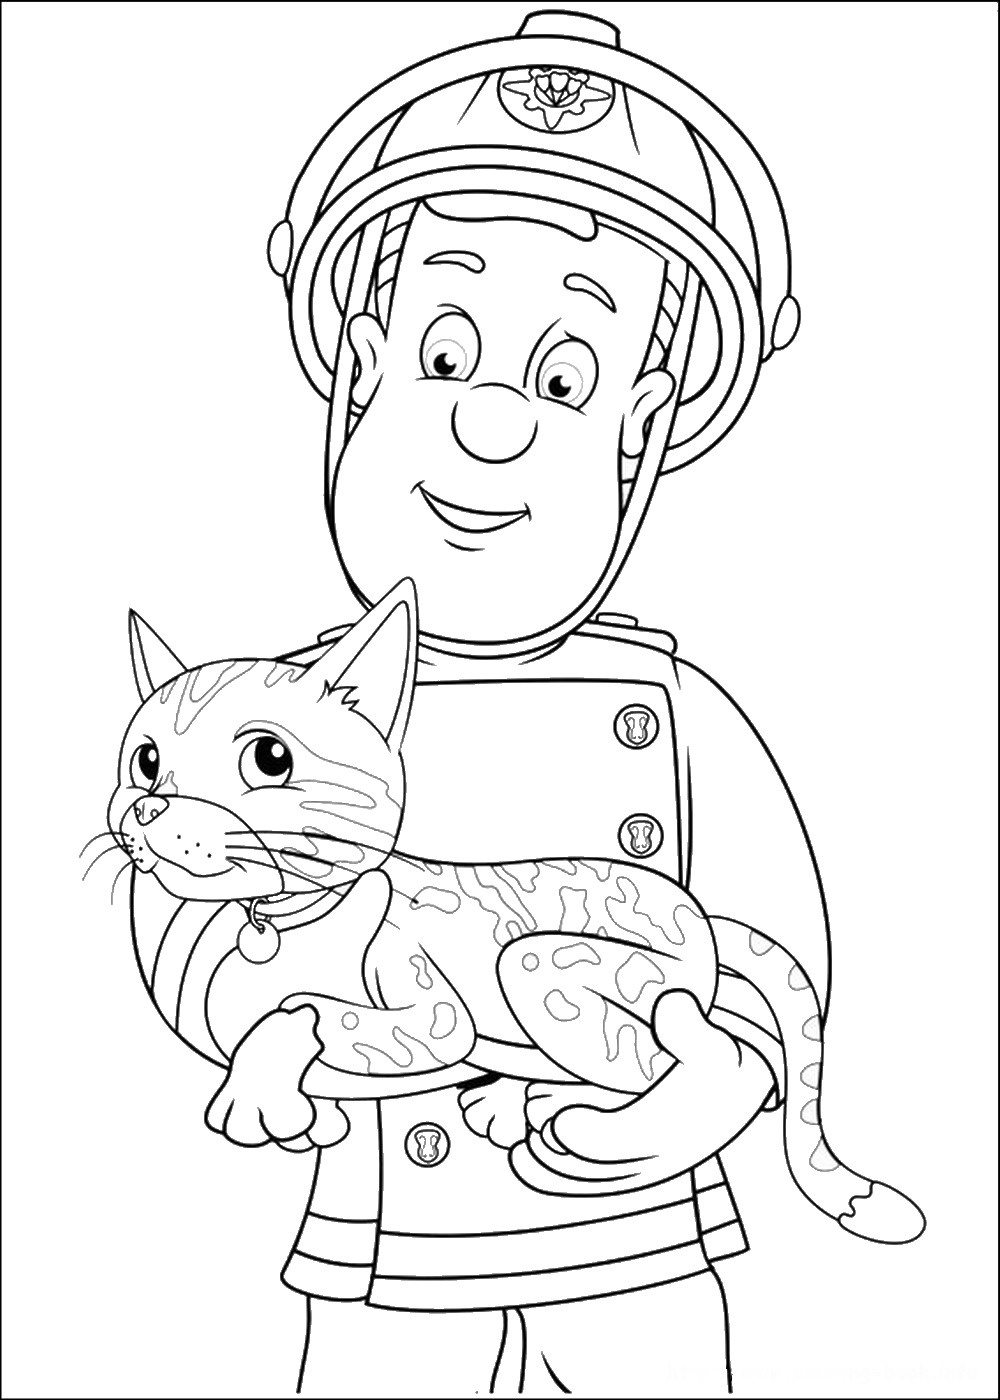 Coloring page: Firefighter (Jobs) #105729 - Free Printable Coloring Pages